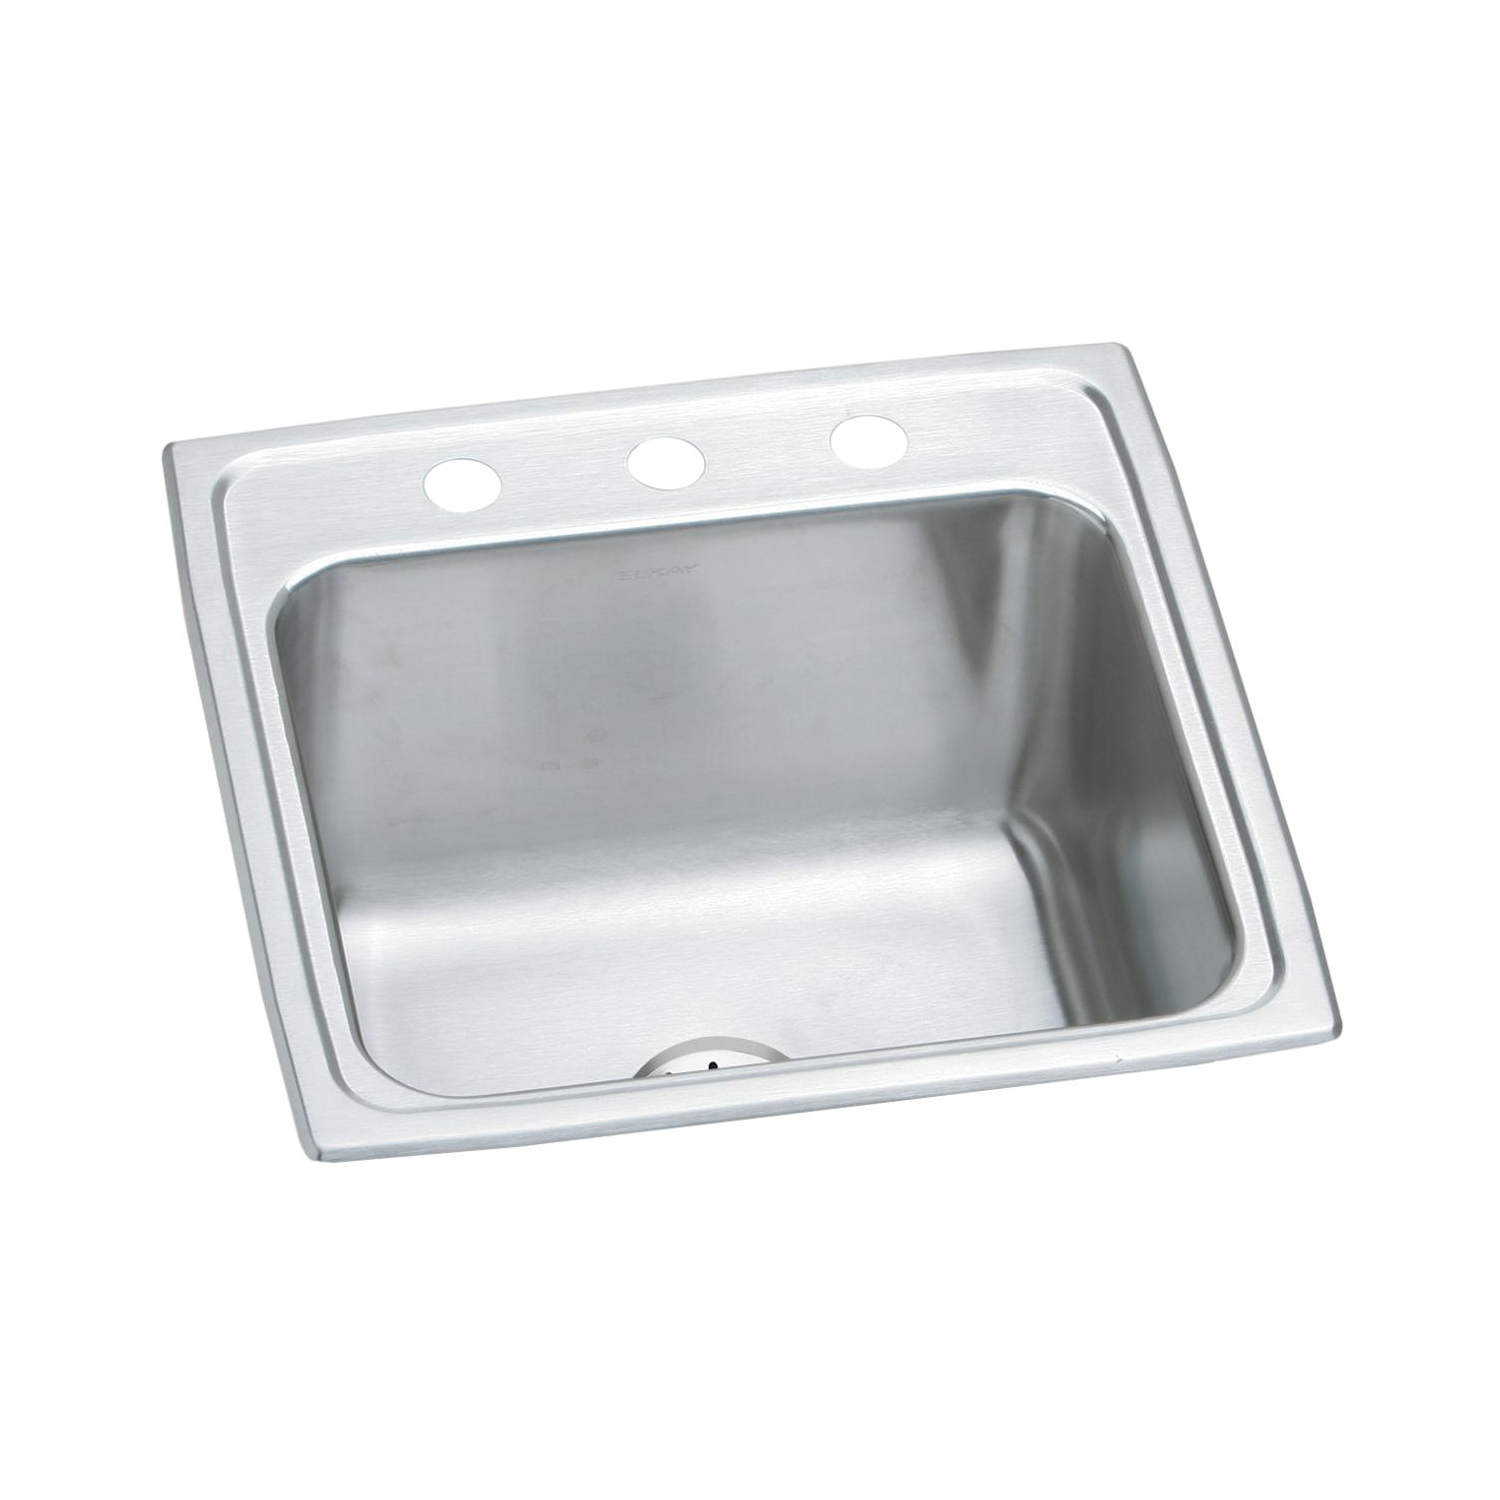 Elkay® DLR191910PD1 Gourmet Laundry Sink, Rectangular, 19 in W x 10-1/8 in D x 19-1/2 in H, Top Mount, Stainless Steel, Lustertone